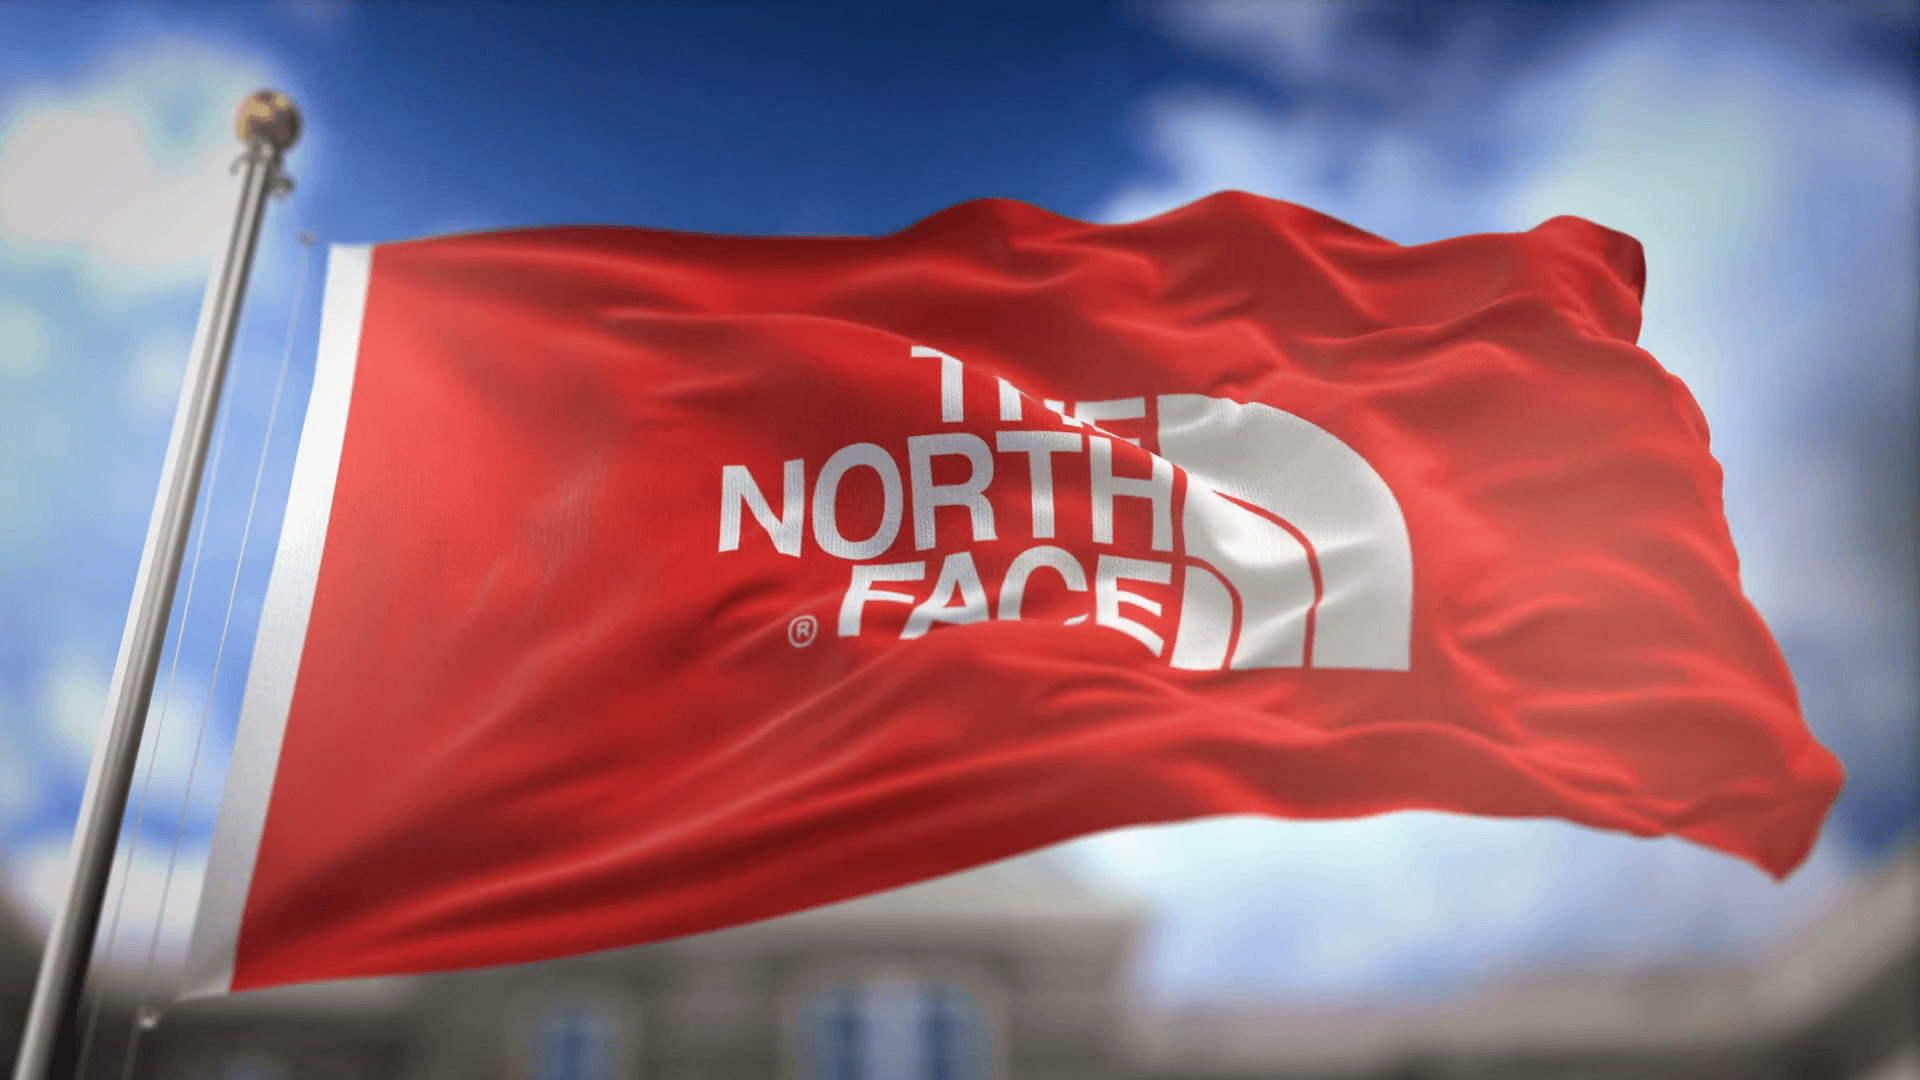 The North Face Red Flag Waving Slow Motion 3D Rendering Blue Sky